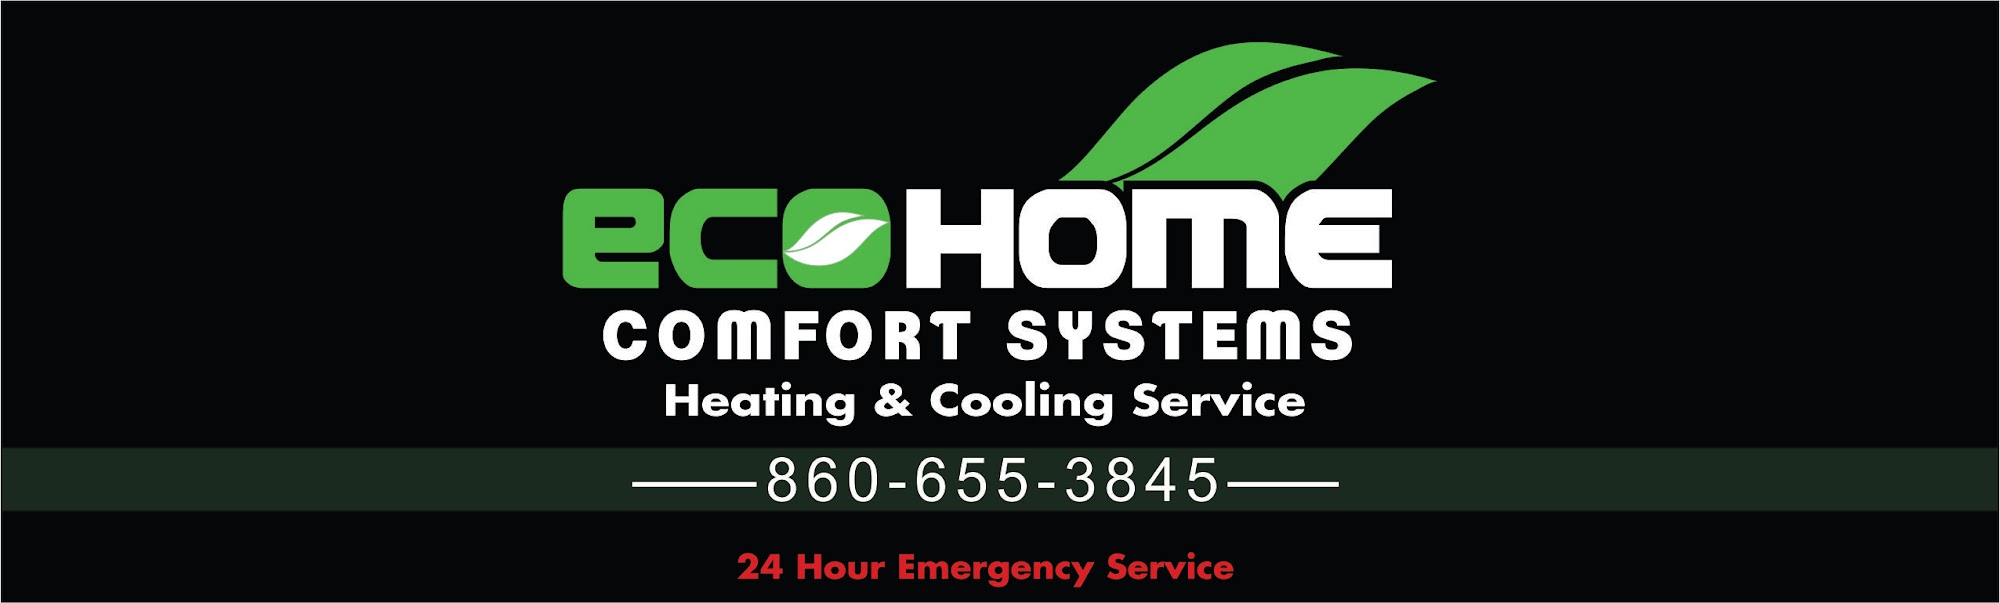 Eco Home Comfort Systems, LLC 175 North St, Goshen Connecticut 06756